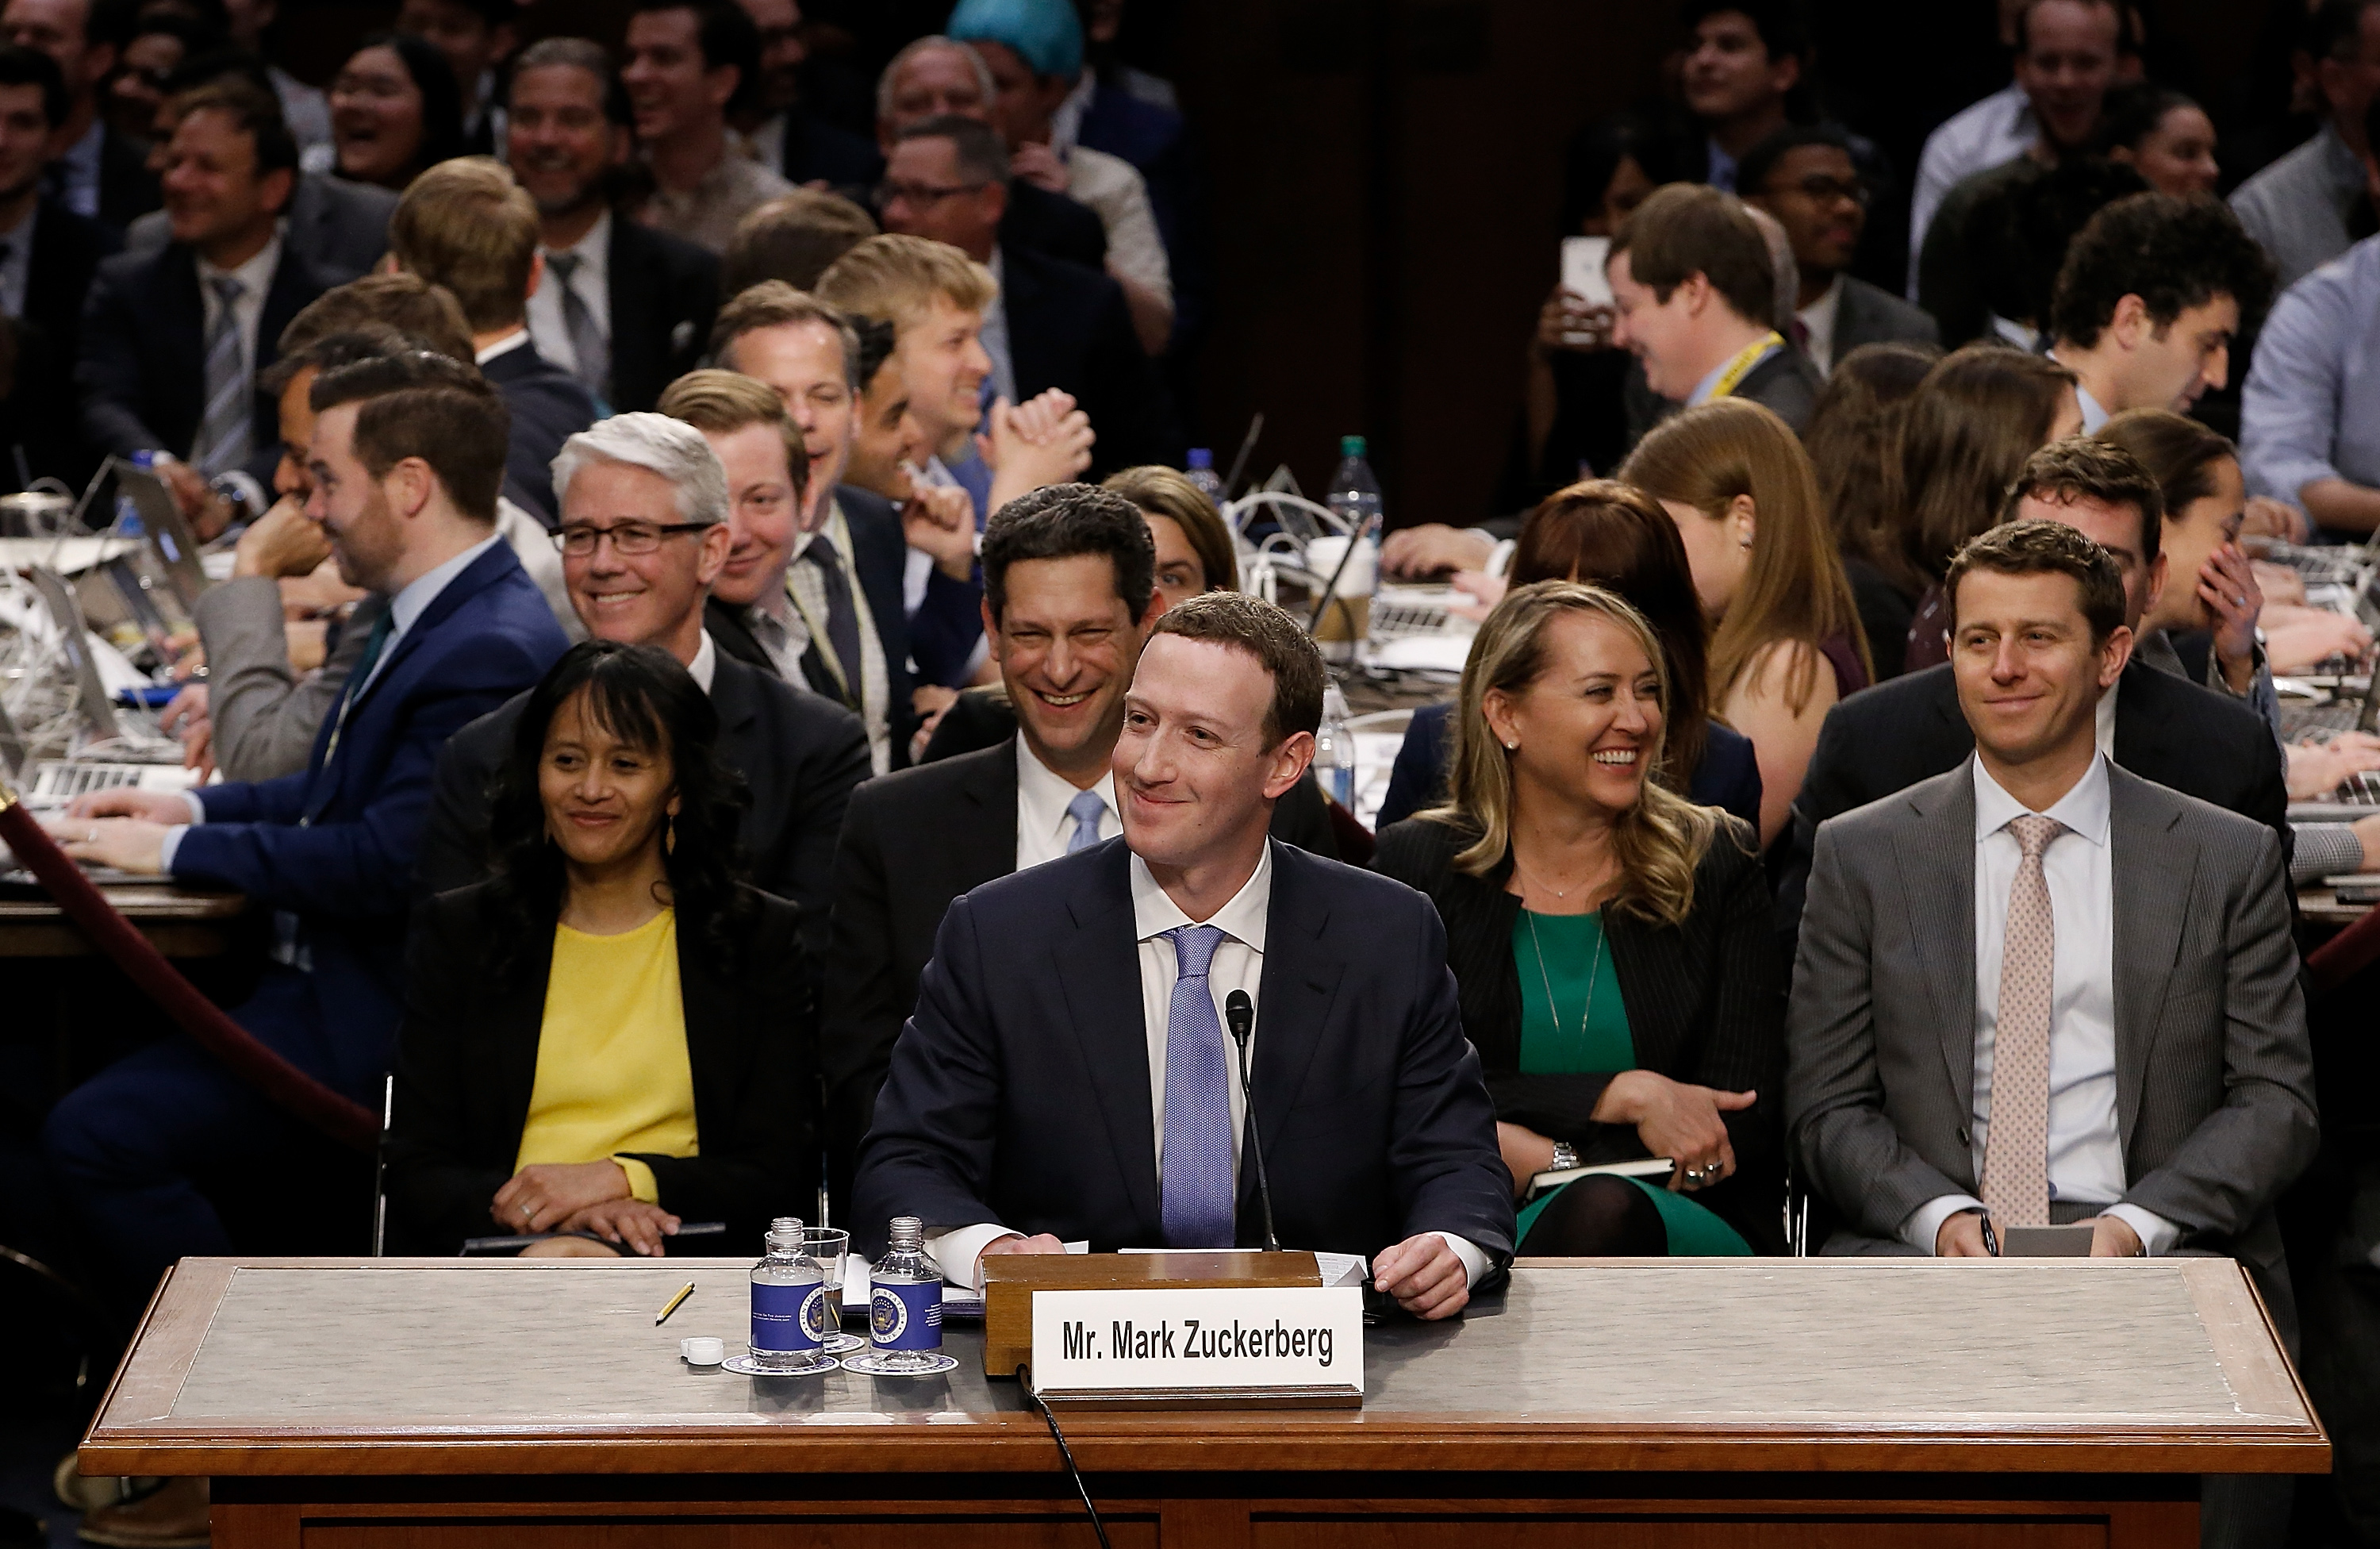 Facebook’s Mark Zuckerberg testifies before a combined Senate Judiciary and Commerce committee hearing in the Hart Senate Office Building on Capitol Hill April 10, 2018 in Washington, DC.&nbsp;